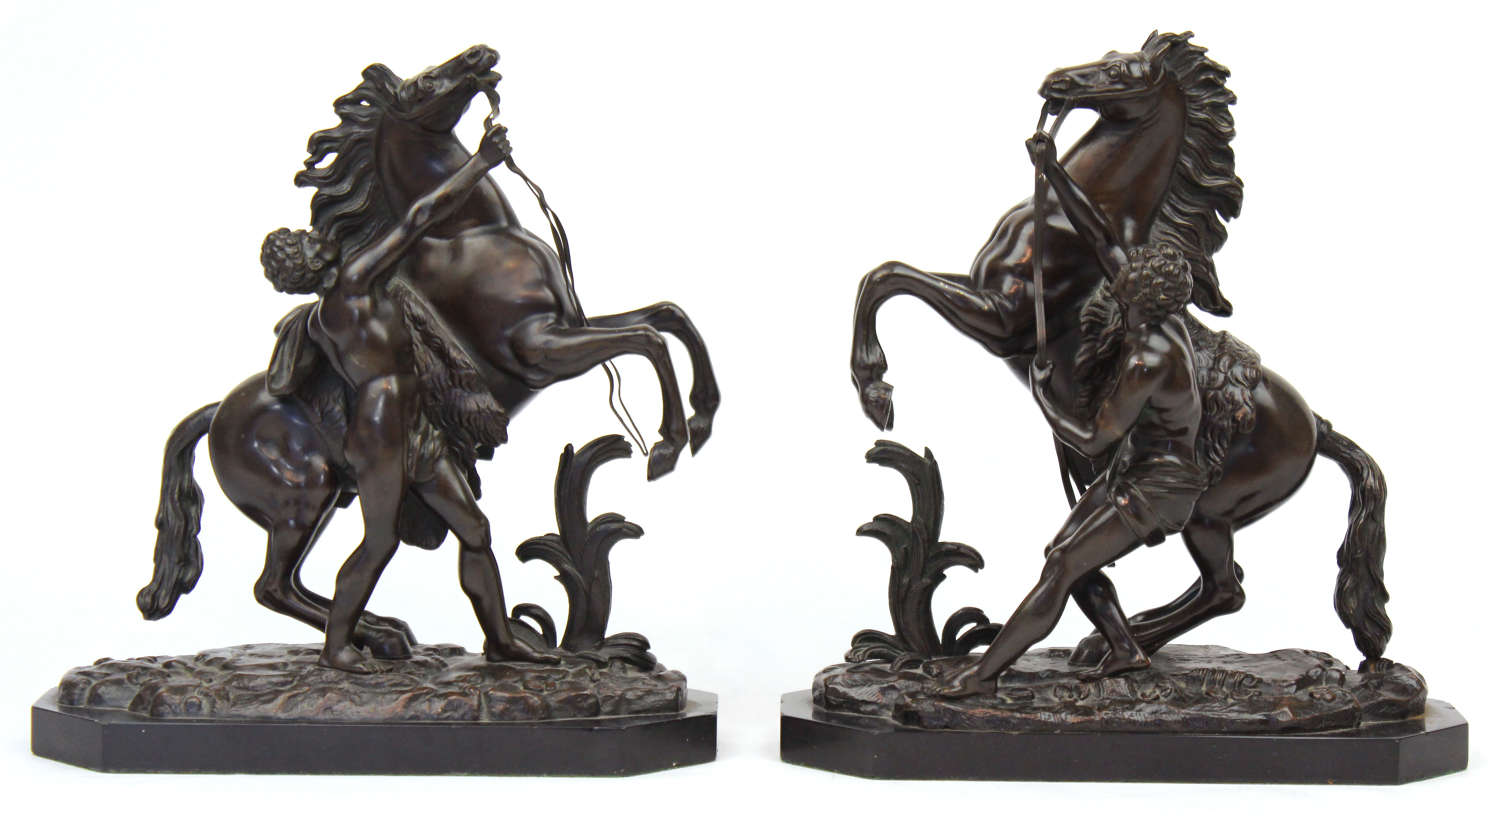 A fine pair of 19th Century Bronze Marley horses with figures.